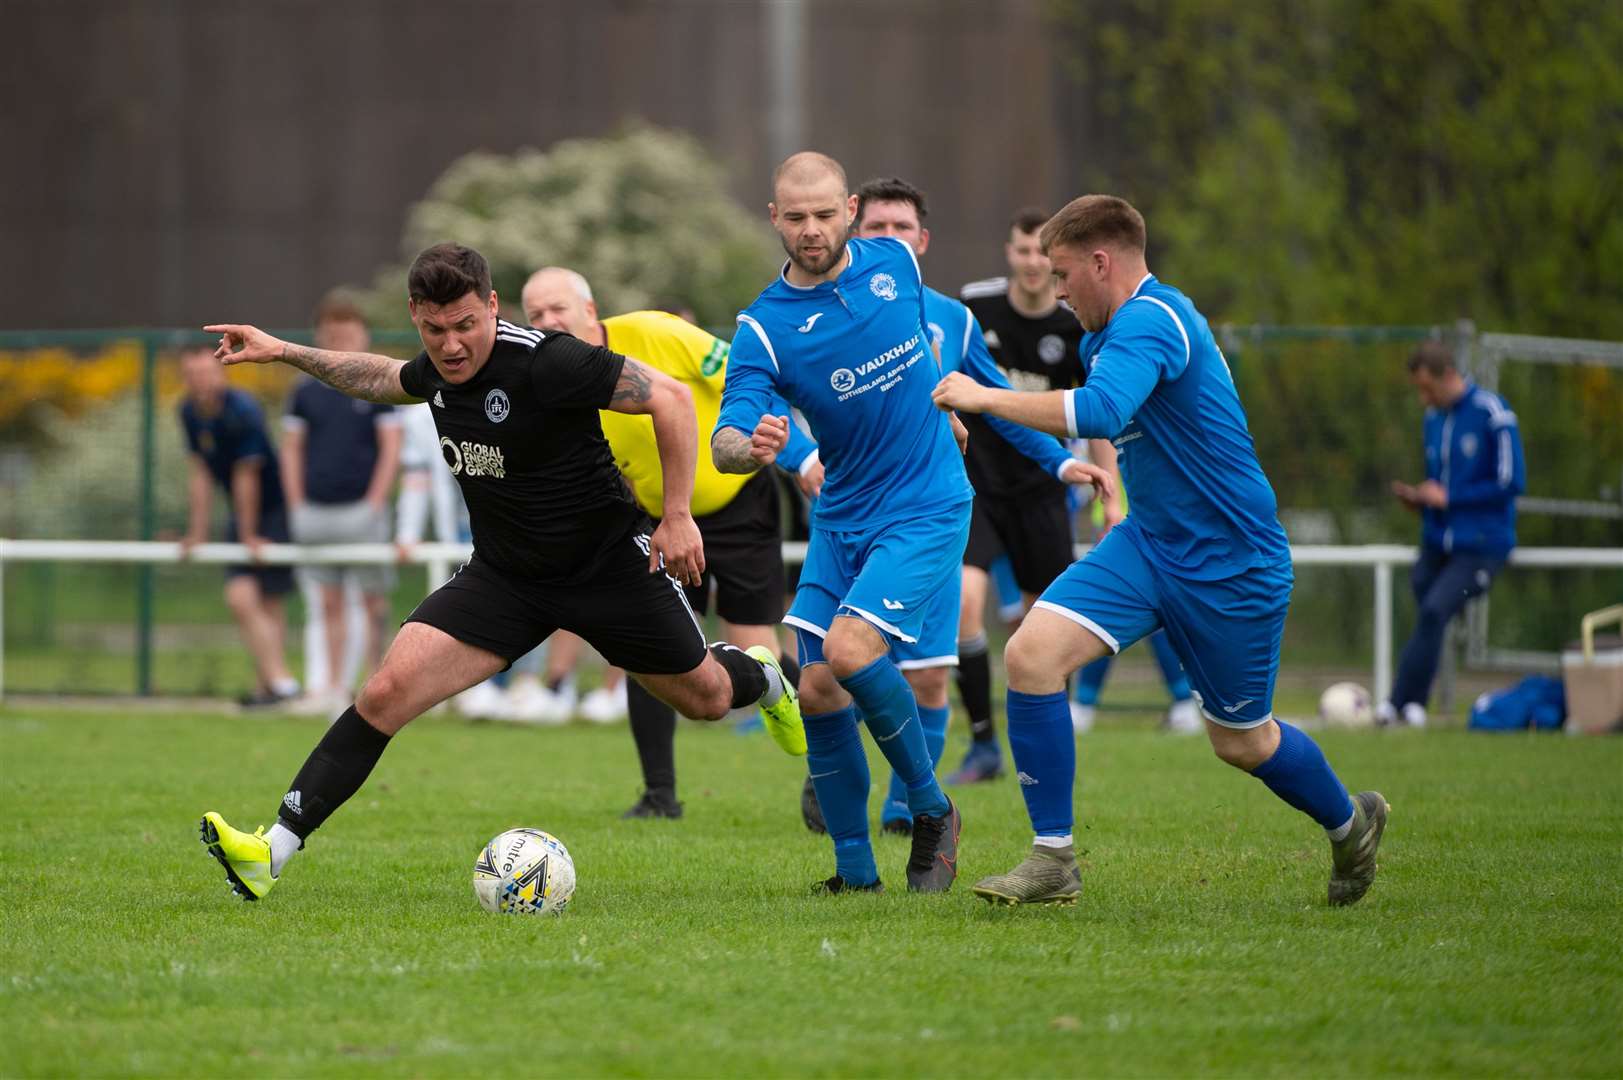 Invergordon are looking for their first victory in any competition this season.